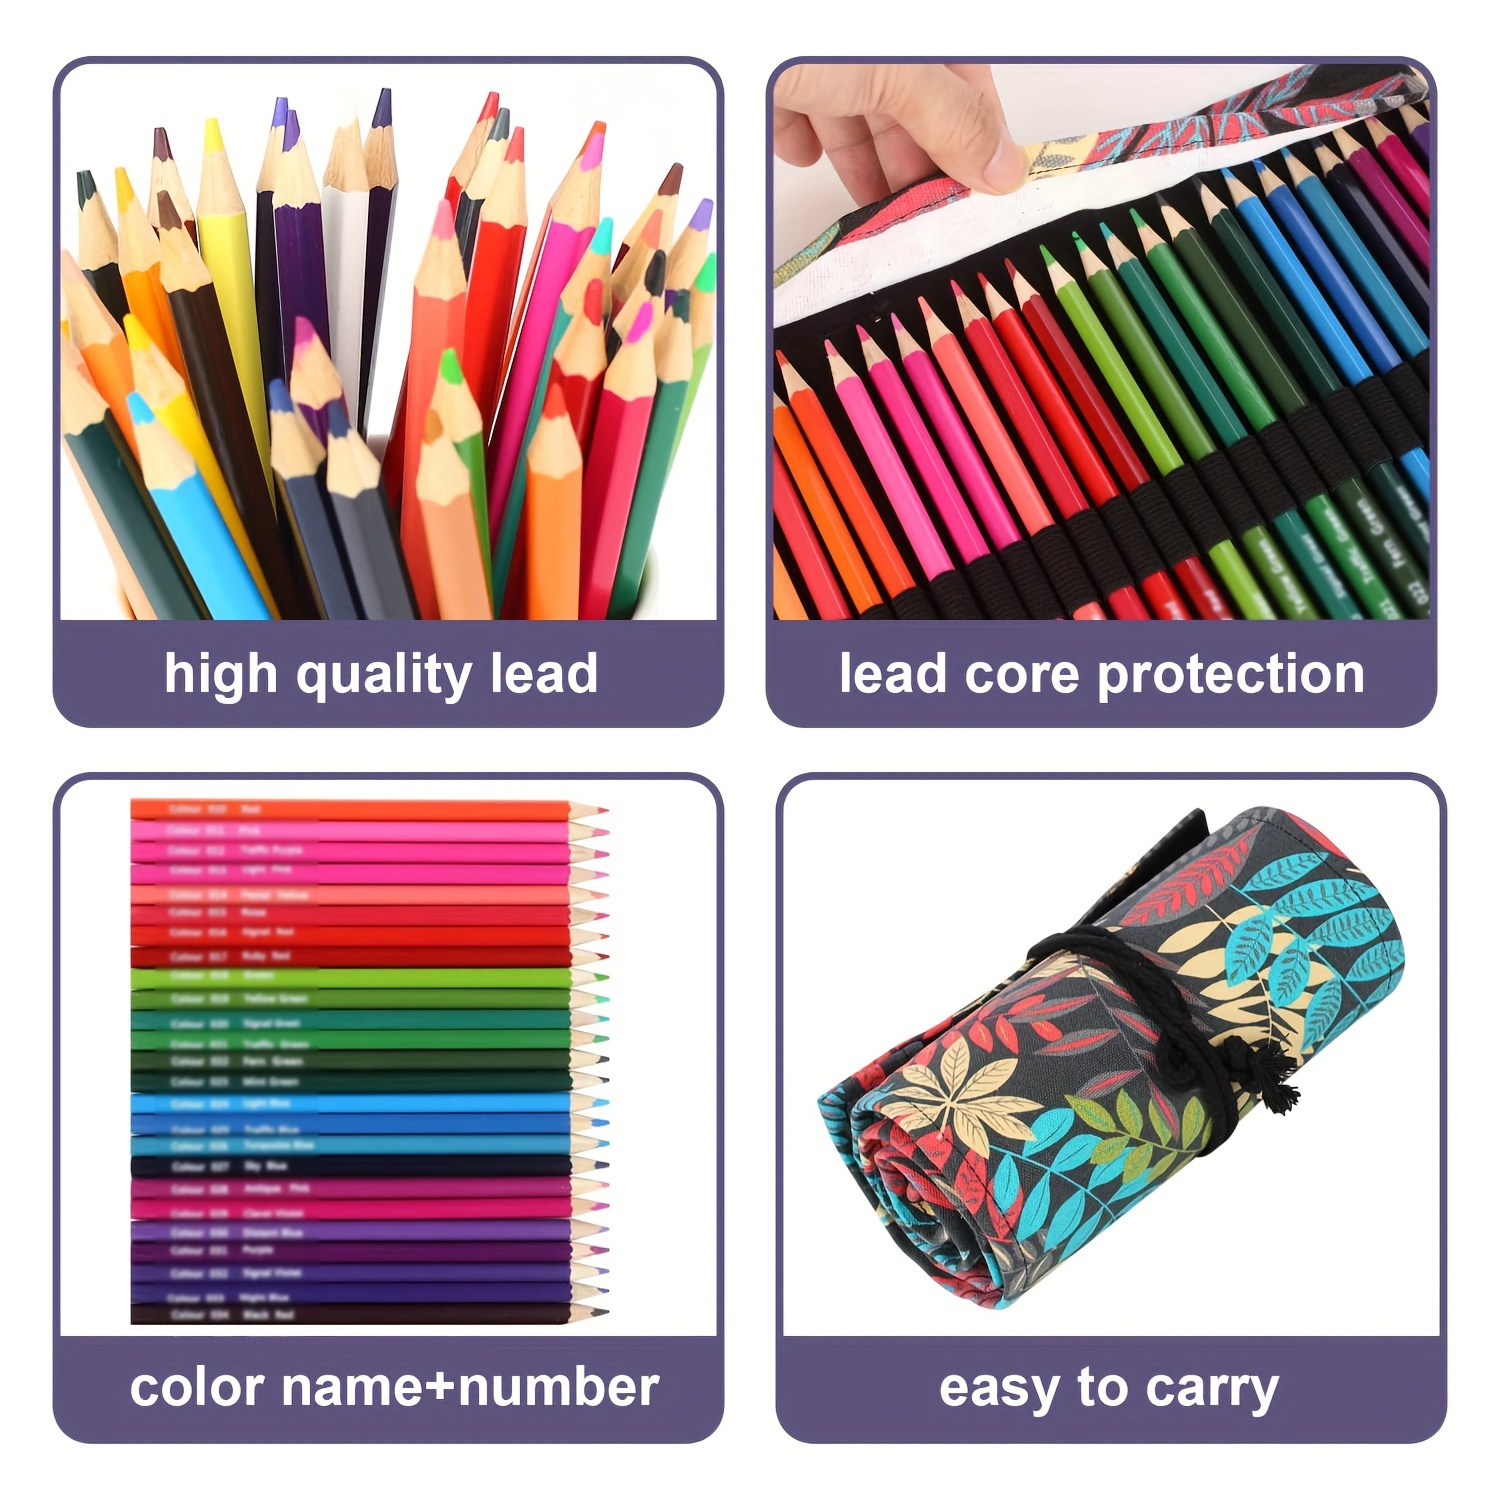 36PCS/Lot Colorful Core Lead Colored Pencils Set for Adults and